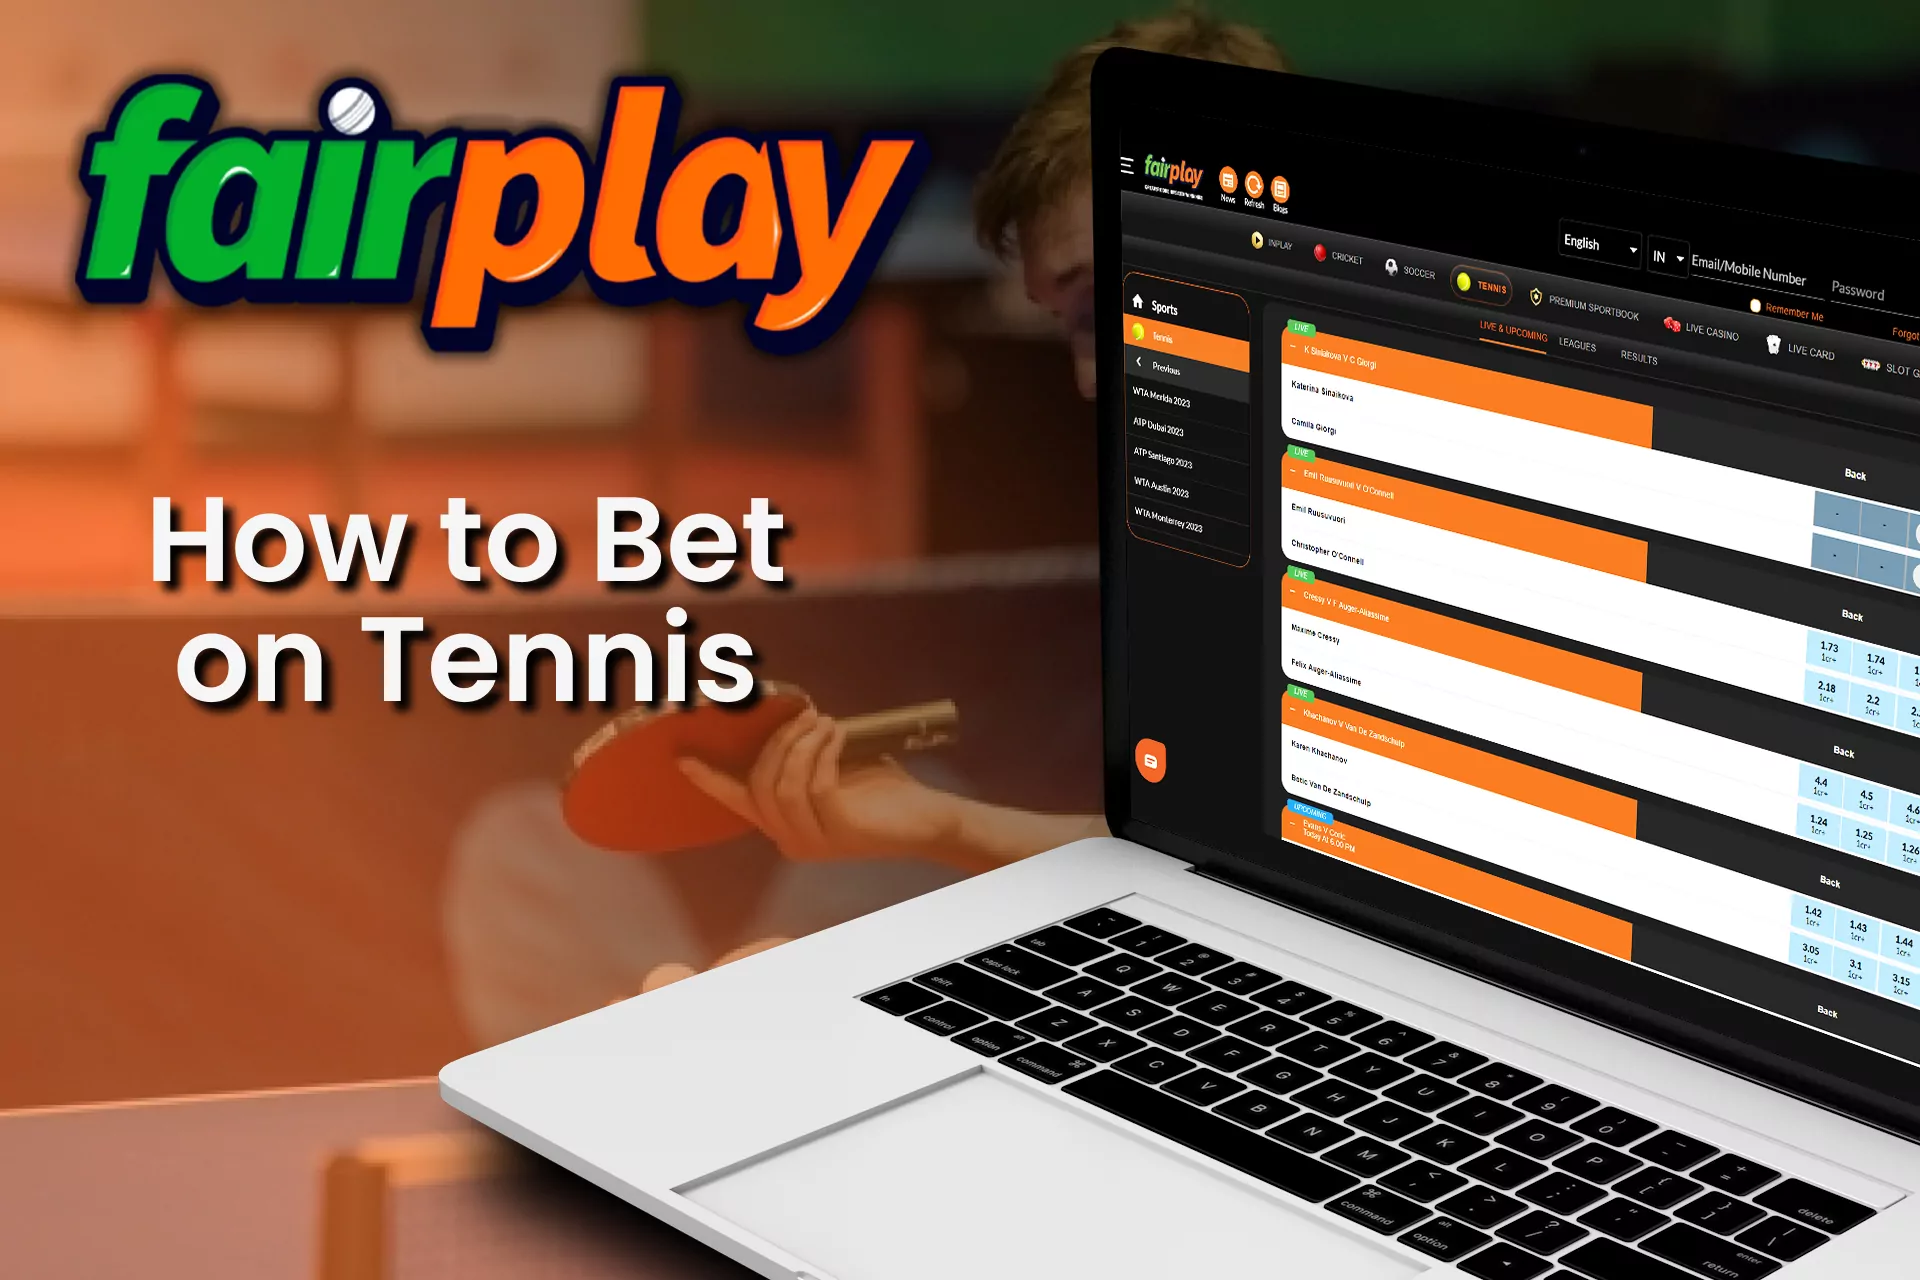 Go to the right section for betting on Fairplay tennis.